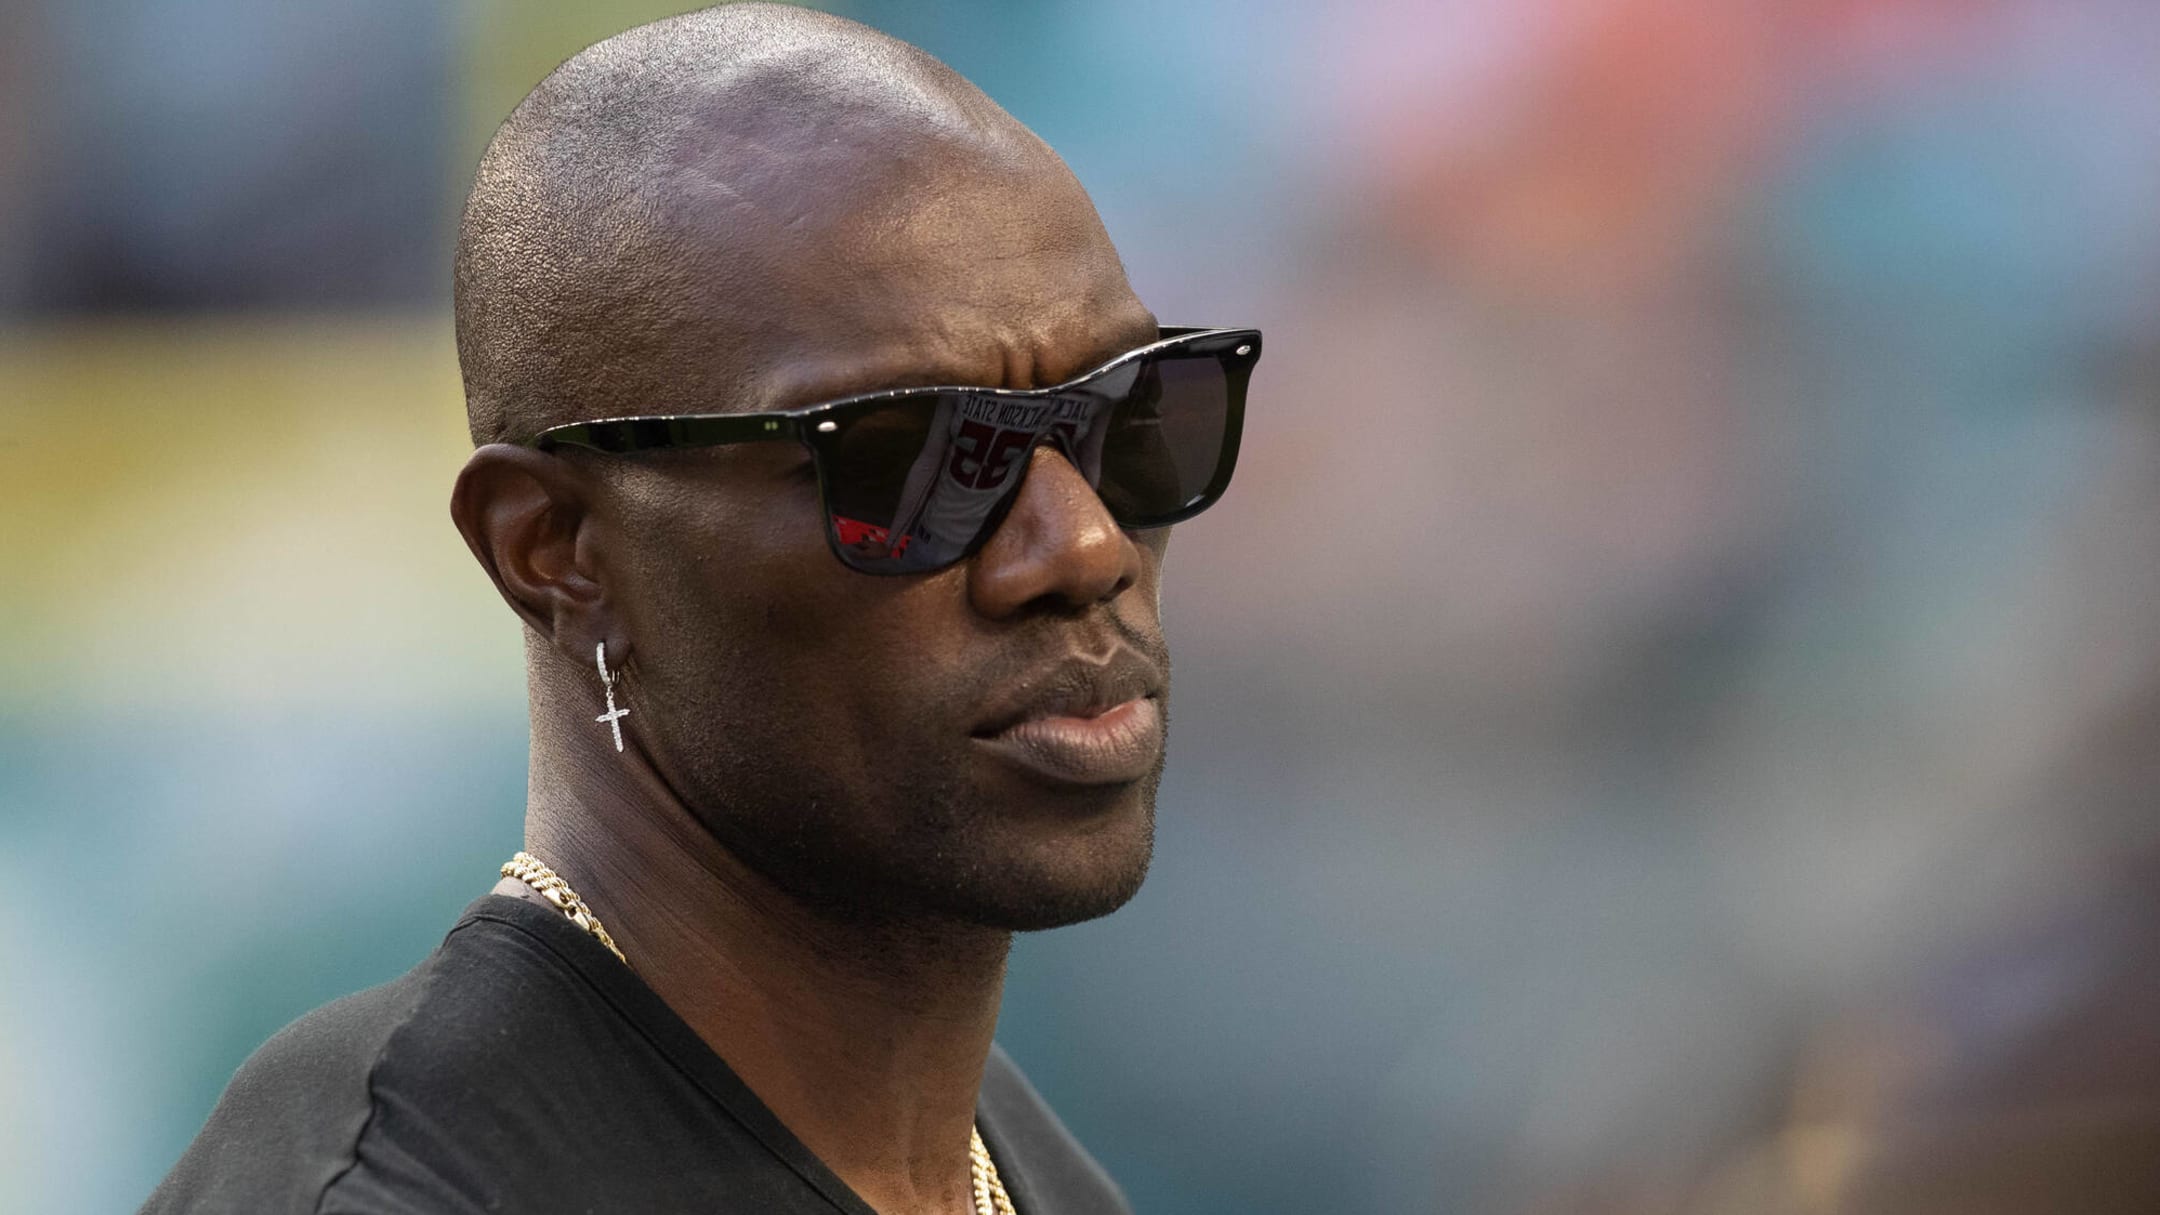 Terrell Owens is 48 years old and still catching TD passes